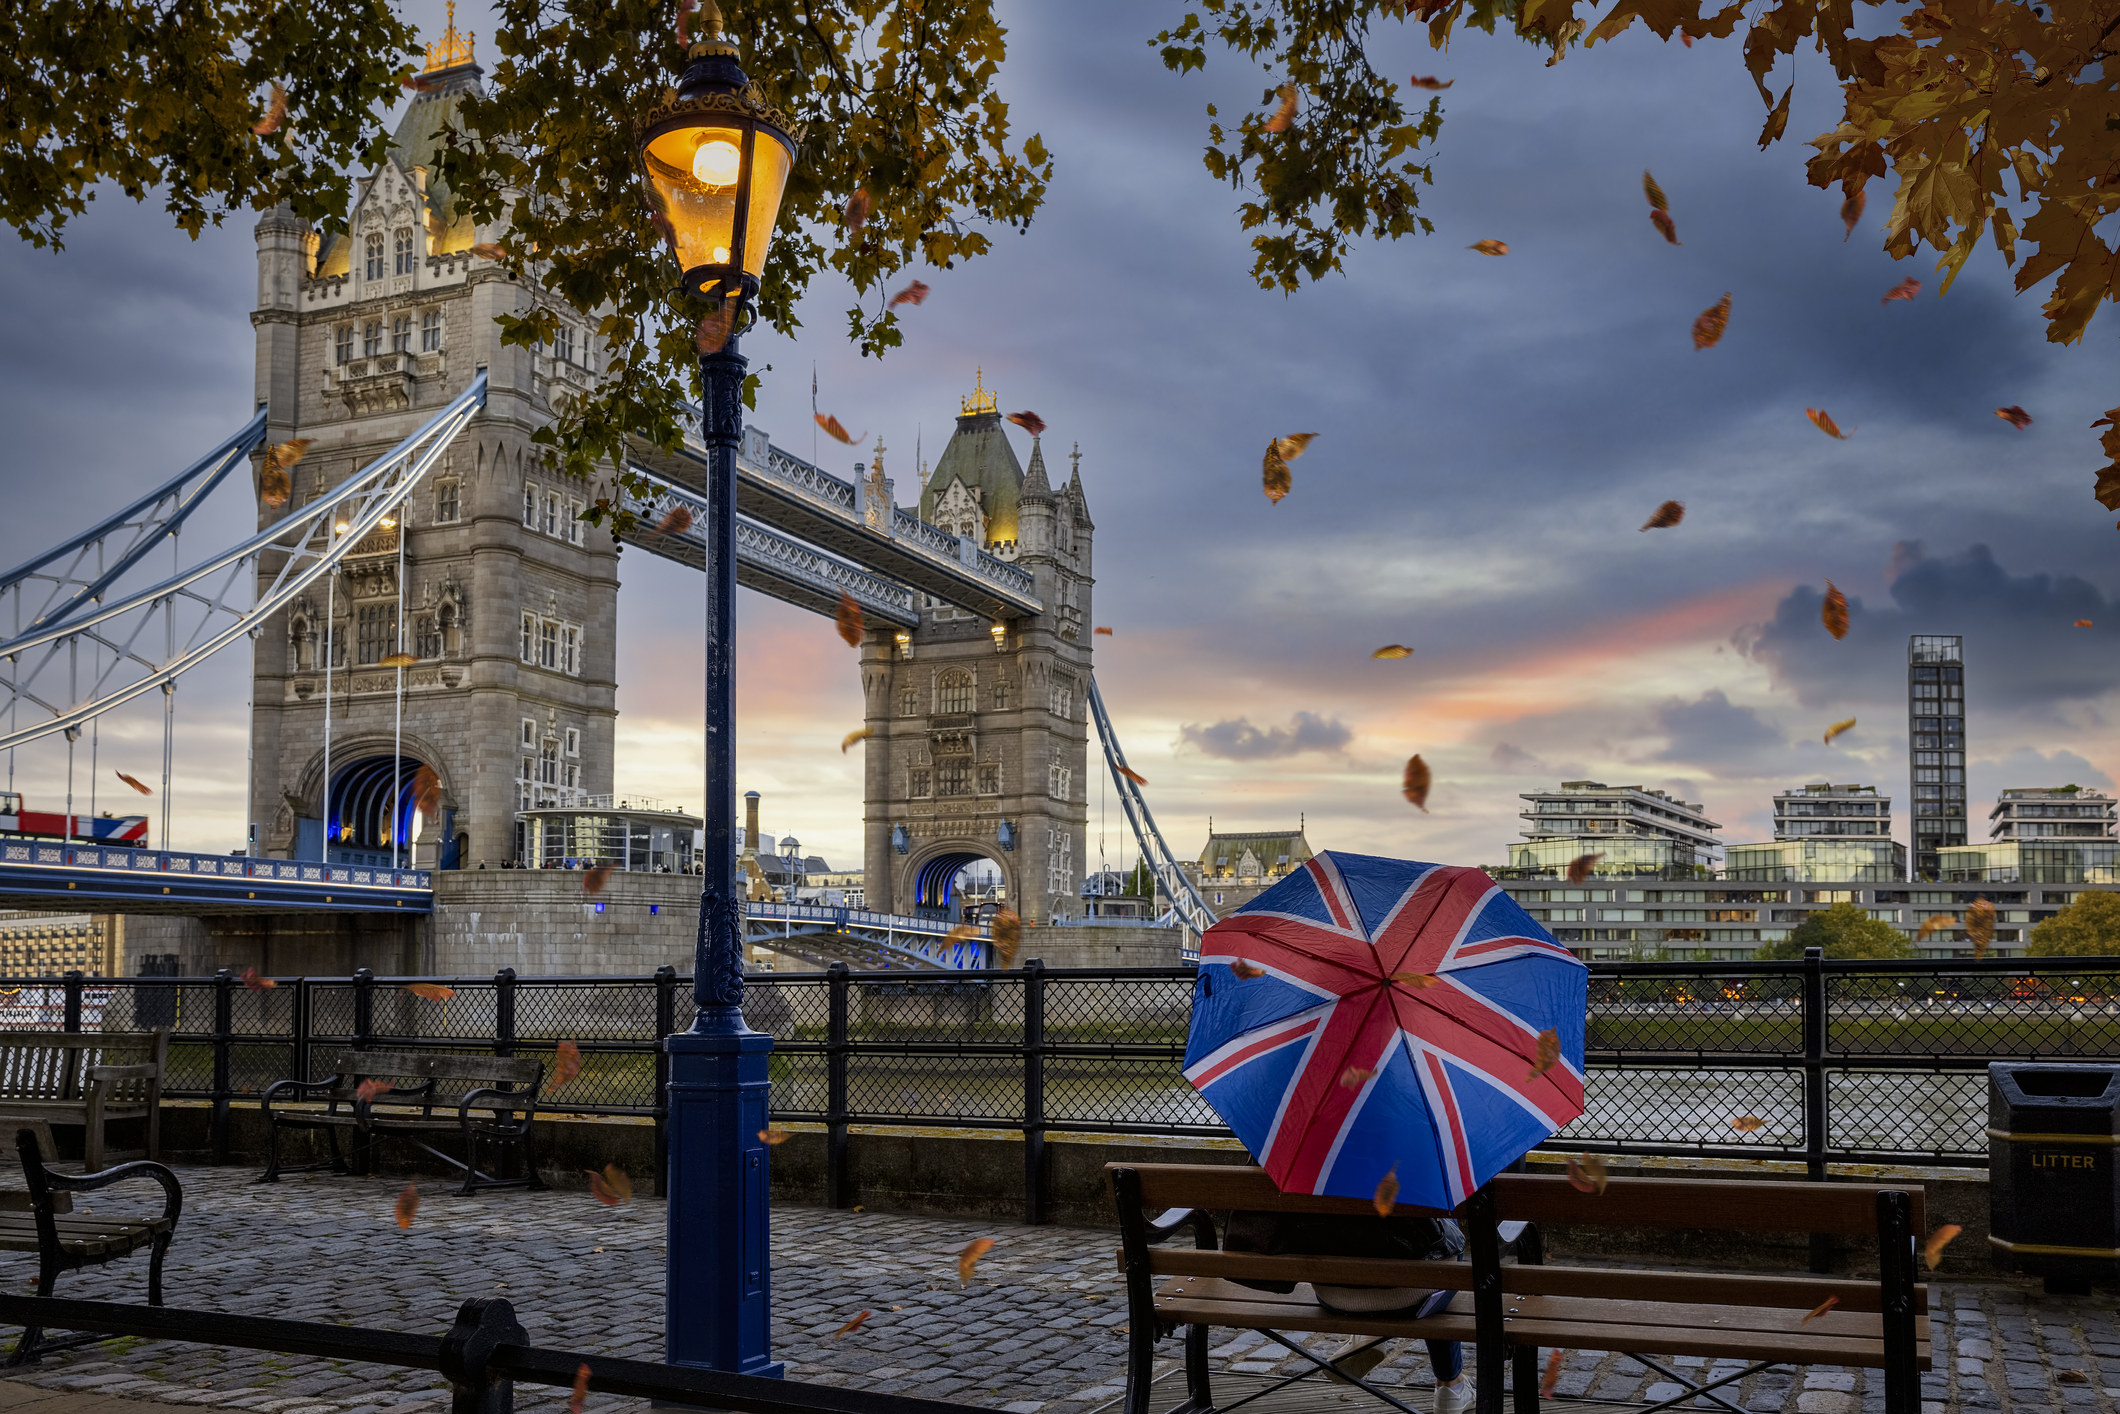 A person standing in front of Tower Bridge with an umbrella.